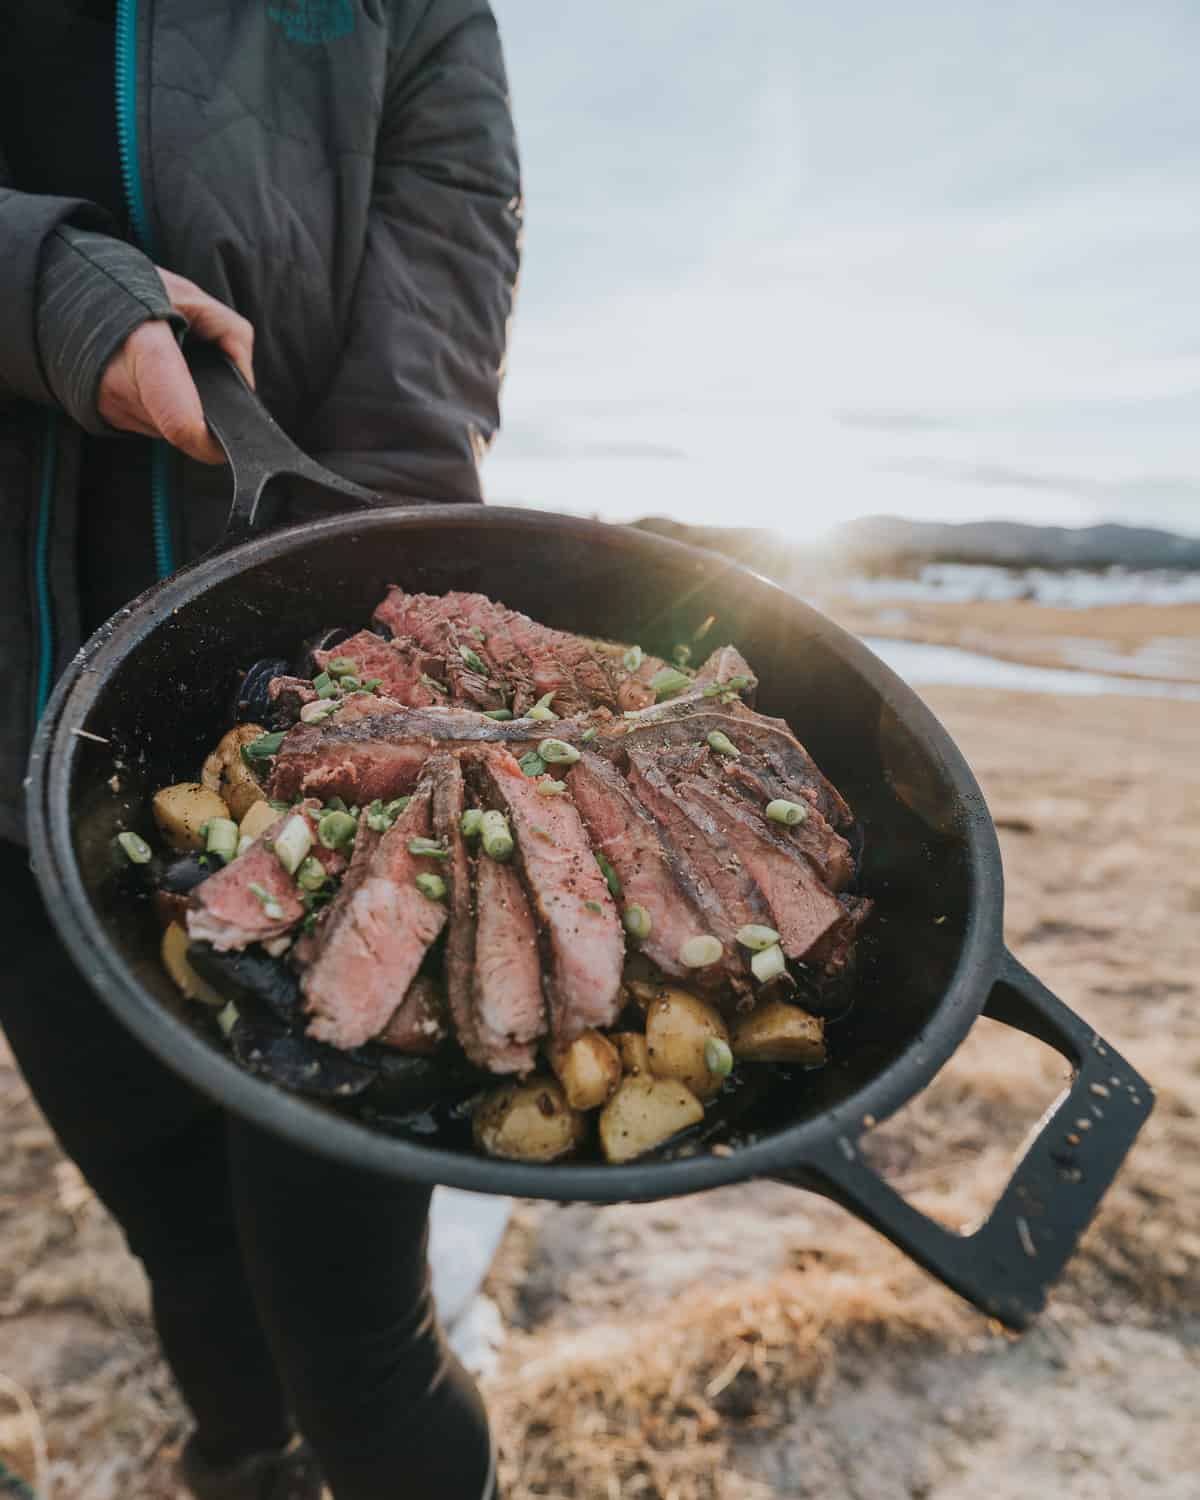 Showing a sliced steak in a skillet on a camping trip. 